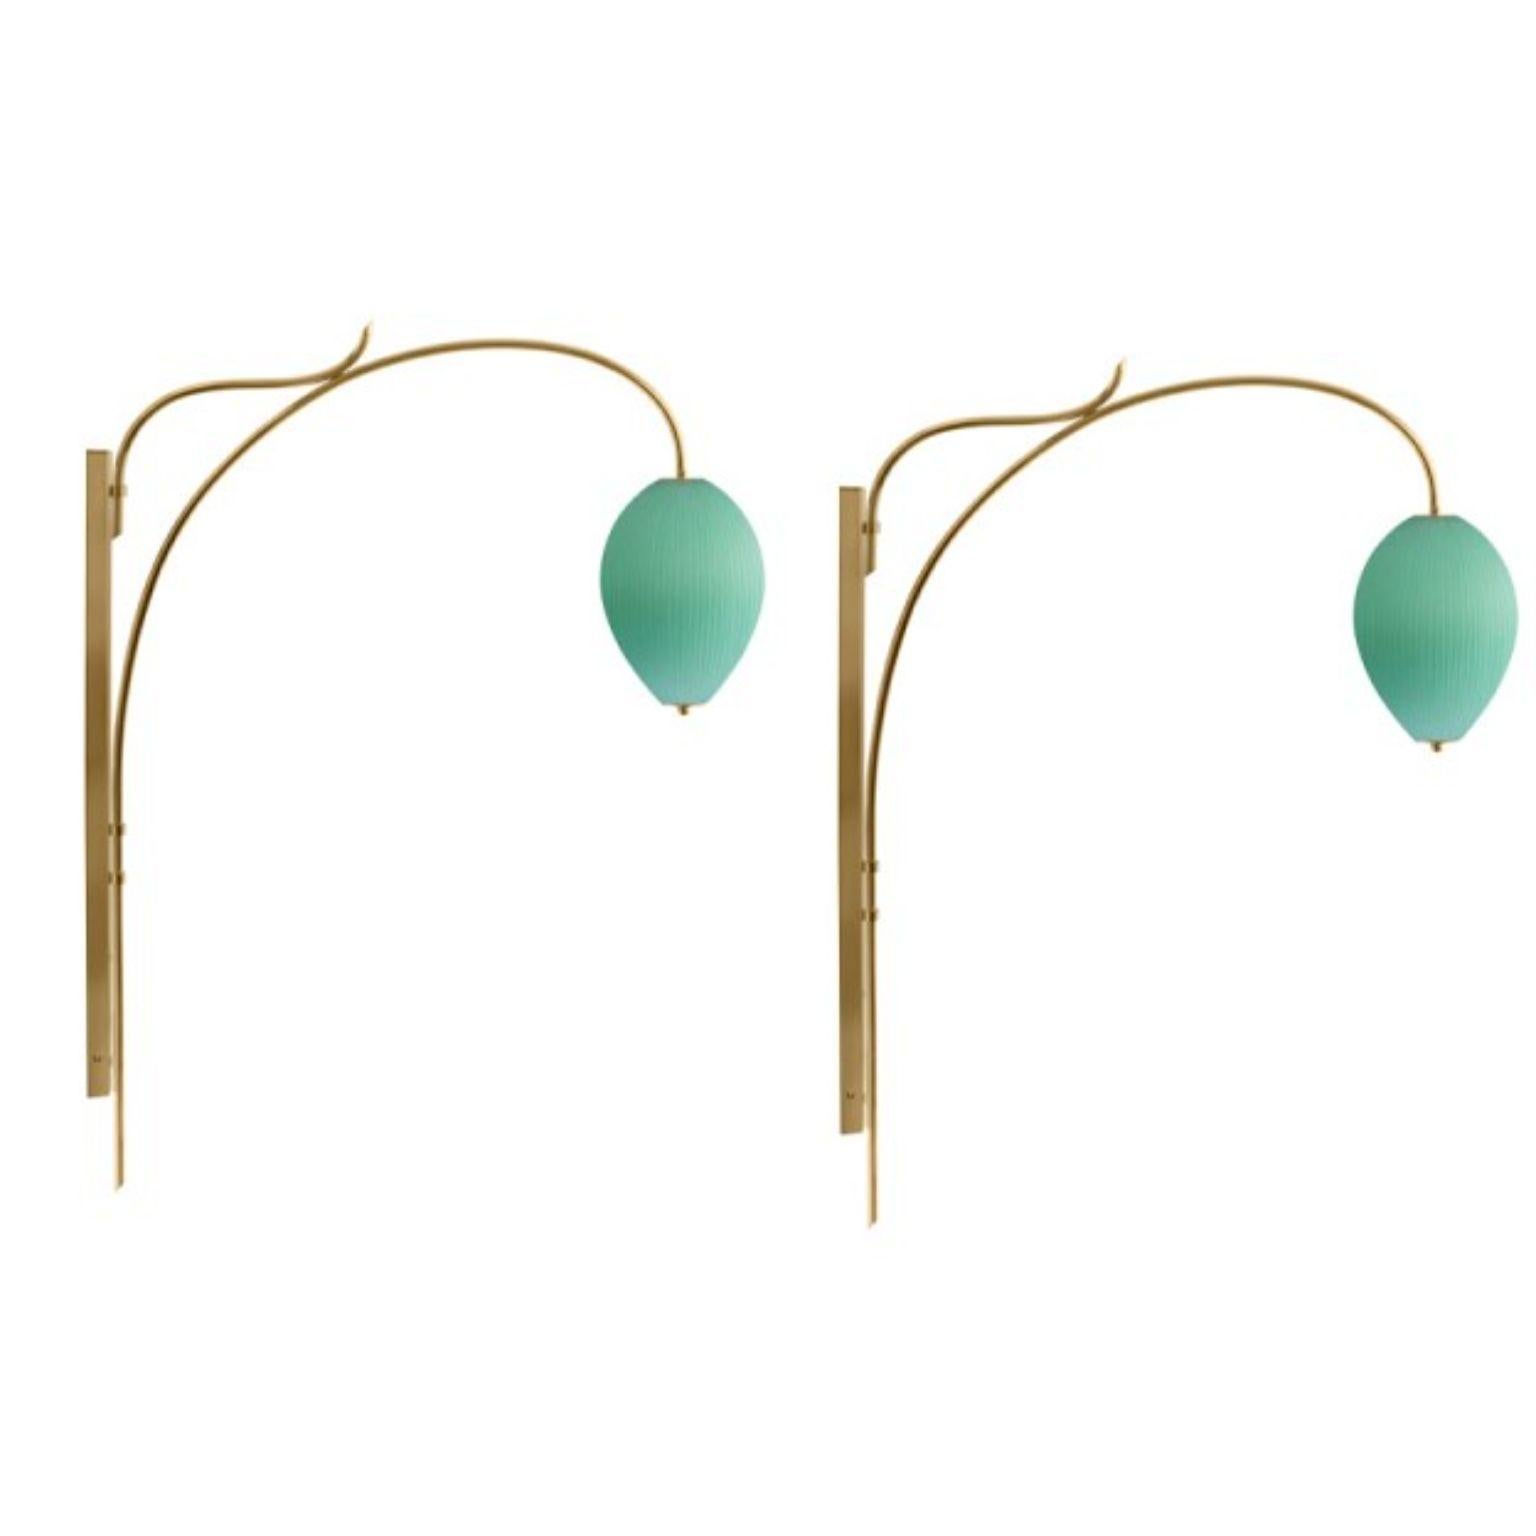 Wall lamp China 10 by Magic Circus Editions
Dimensions: H 134 x W 25.2 x D 113.5 cm
Materials: Brass, mouth blown glass sculpted with a diamond saw
Colour: jade green

Available finishes: brass, nickel
Available colours: enamel soft white, soft